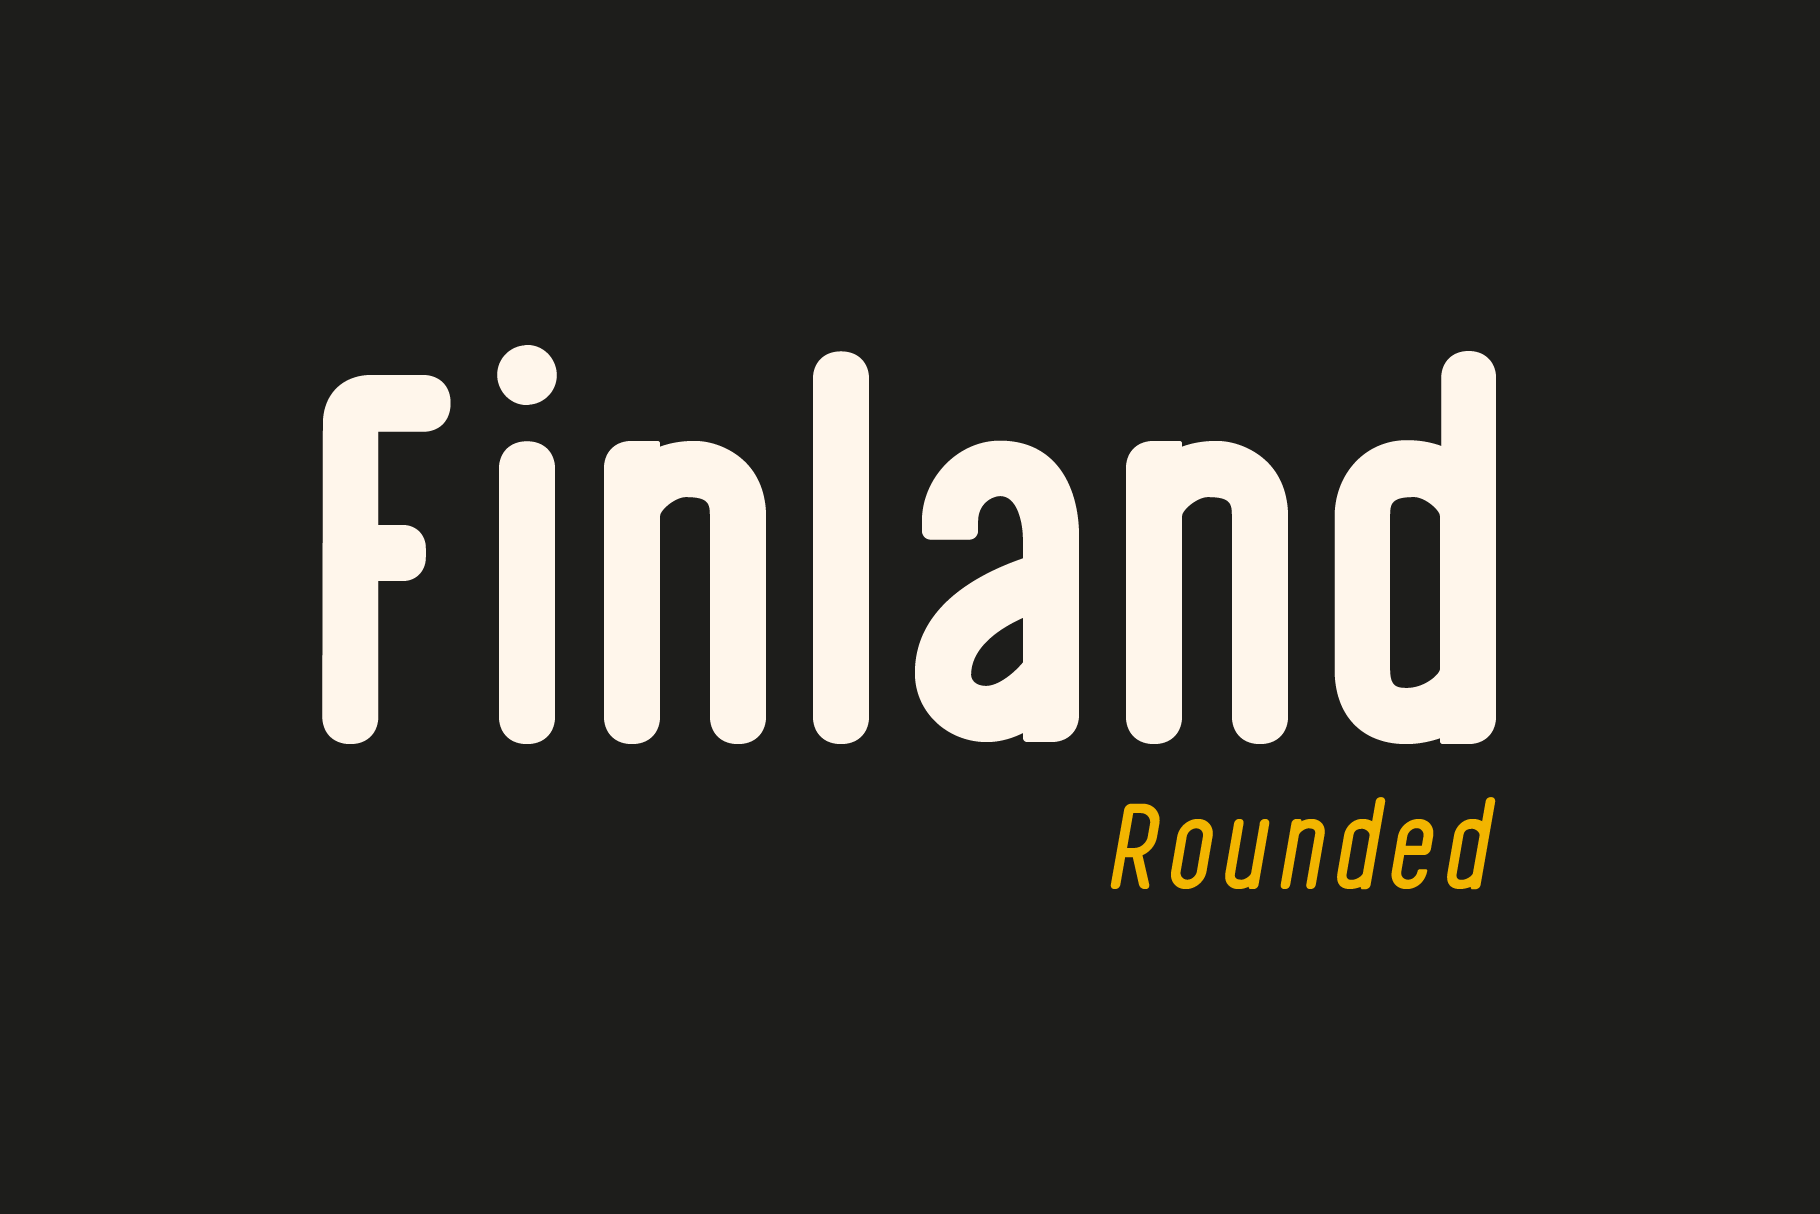 Finland Rounded Demo